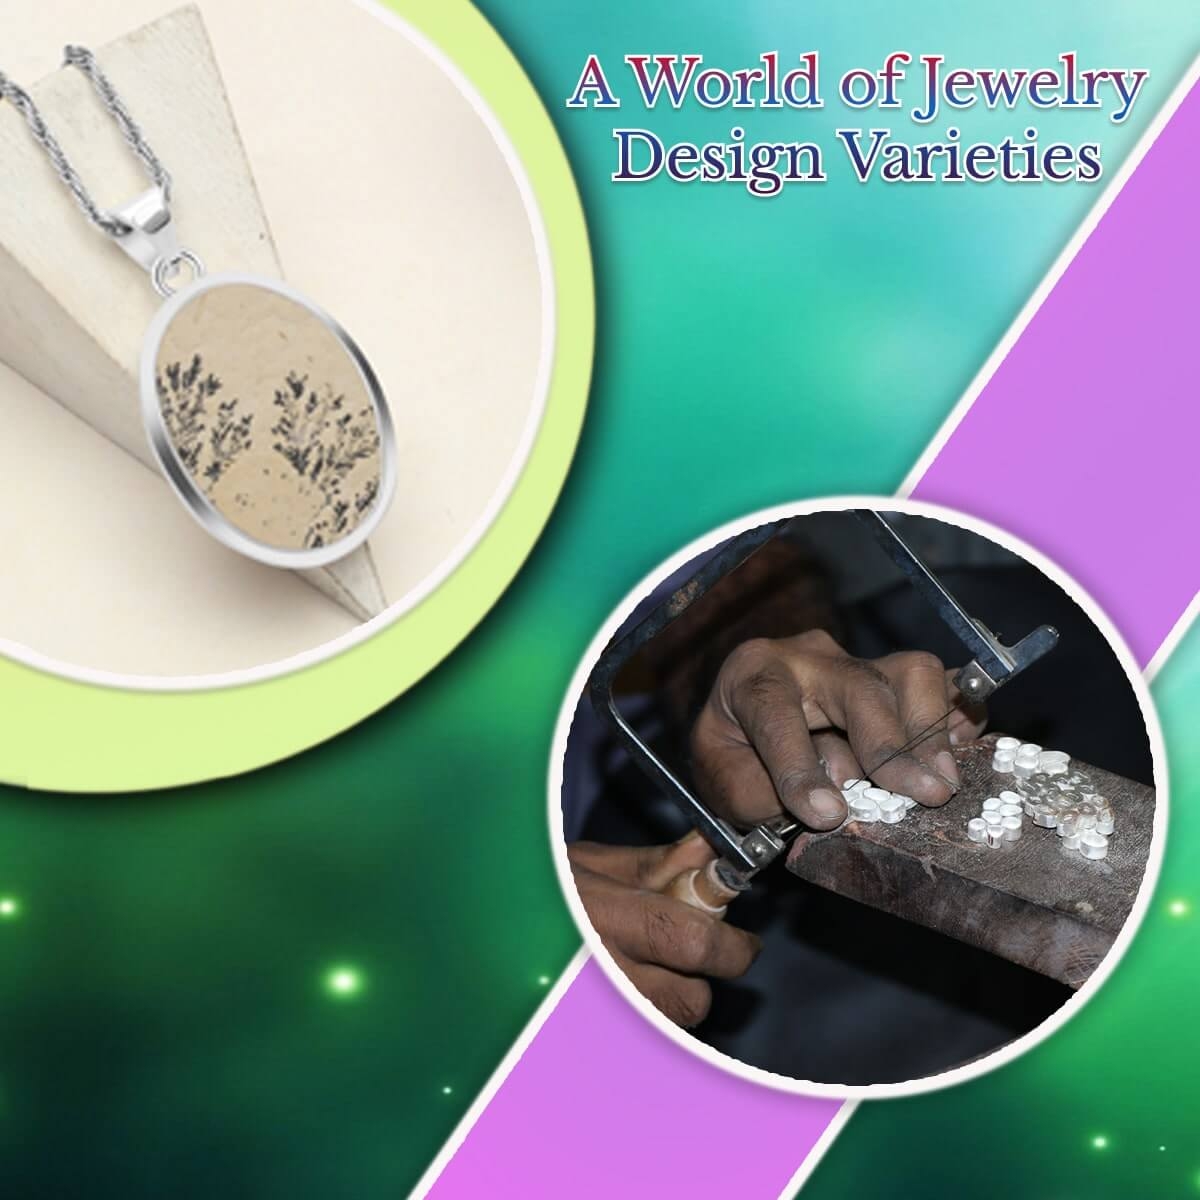 Types of Jewelry Designs Available in the Market